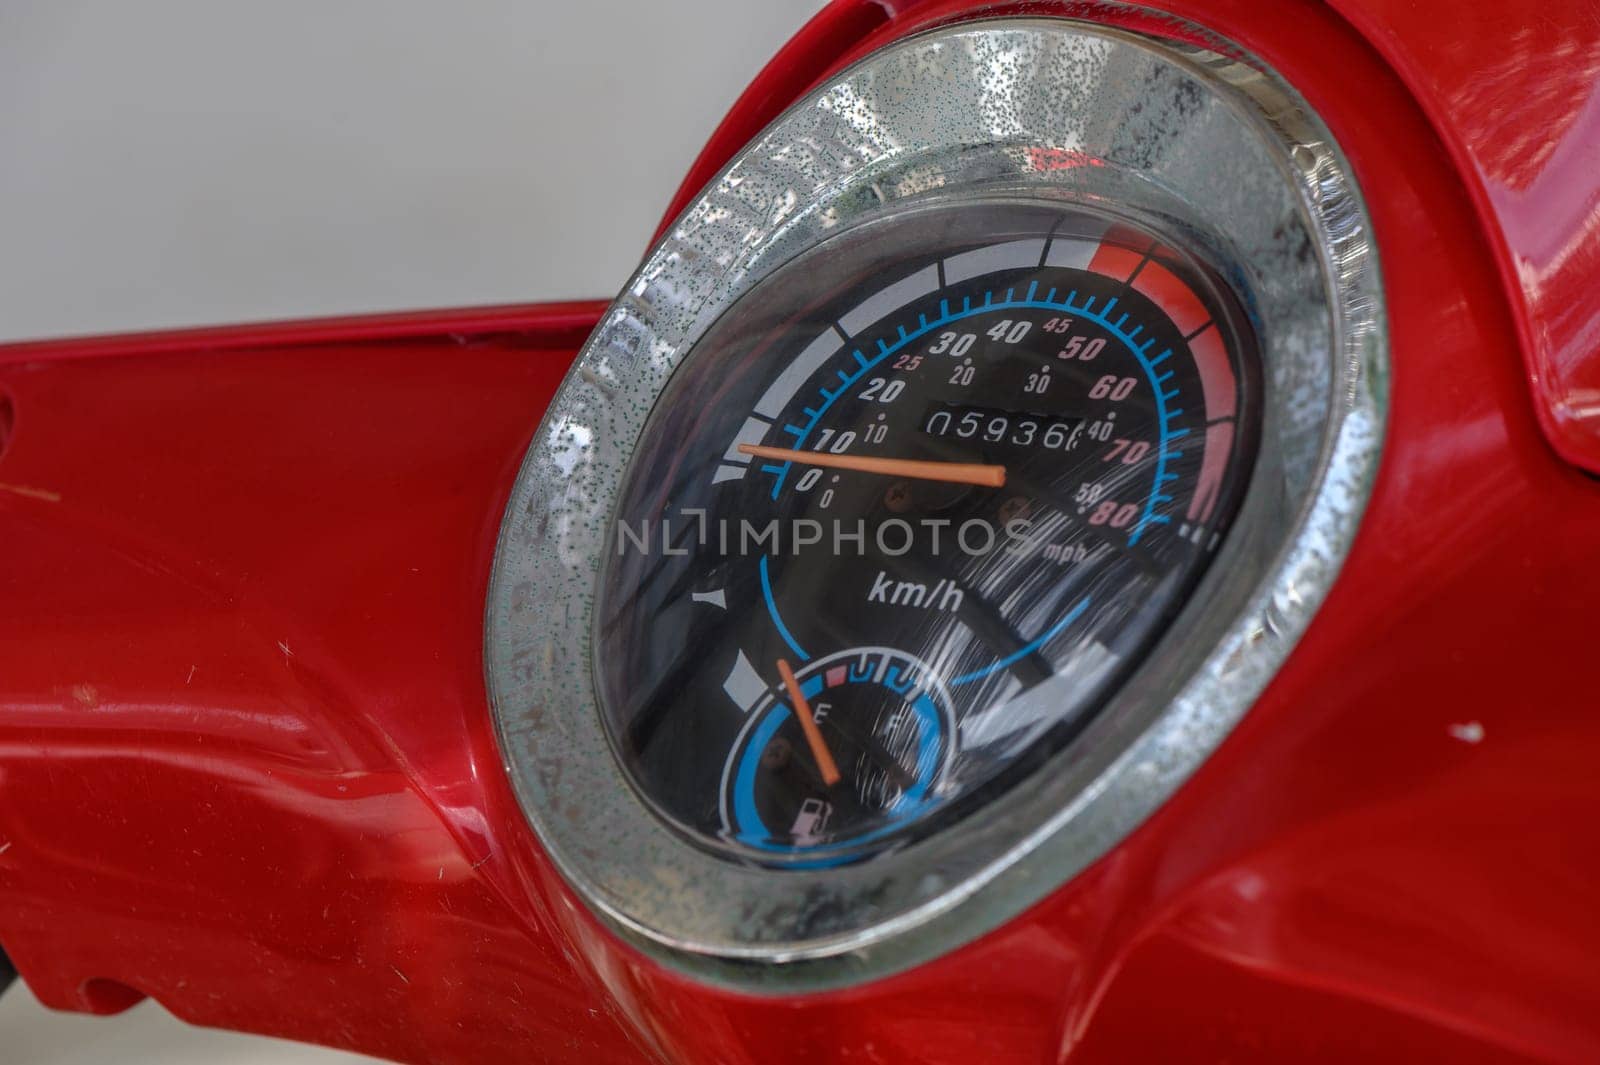 speedometer and instrument panel on a scooter 1 by Mixa74